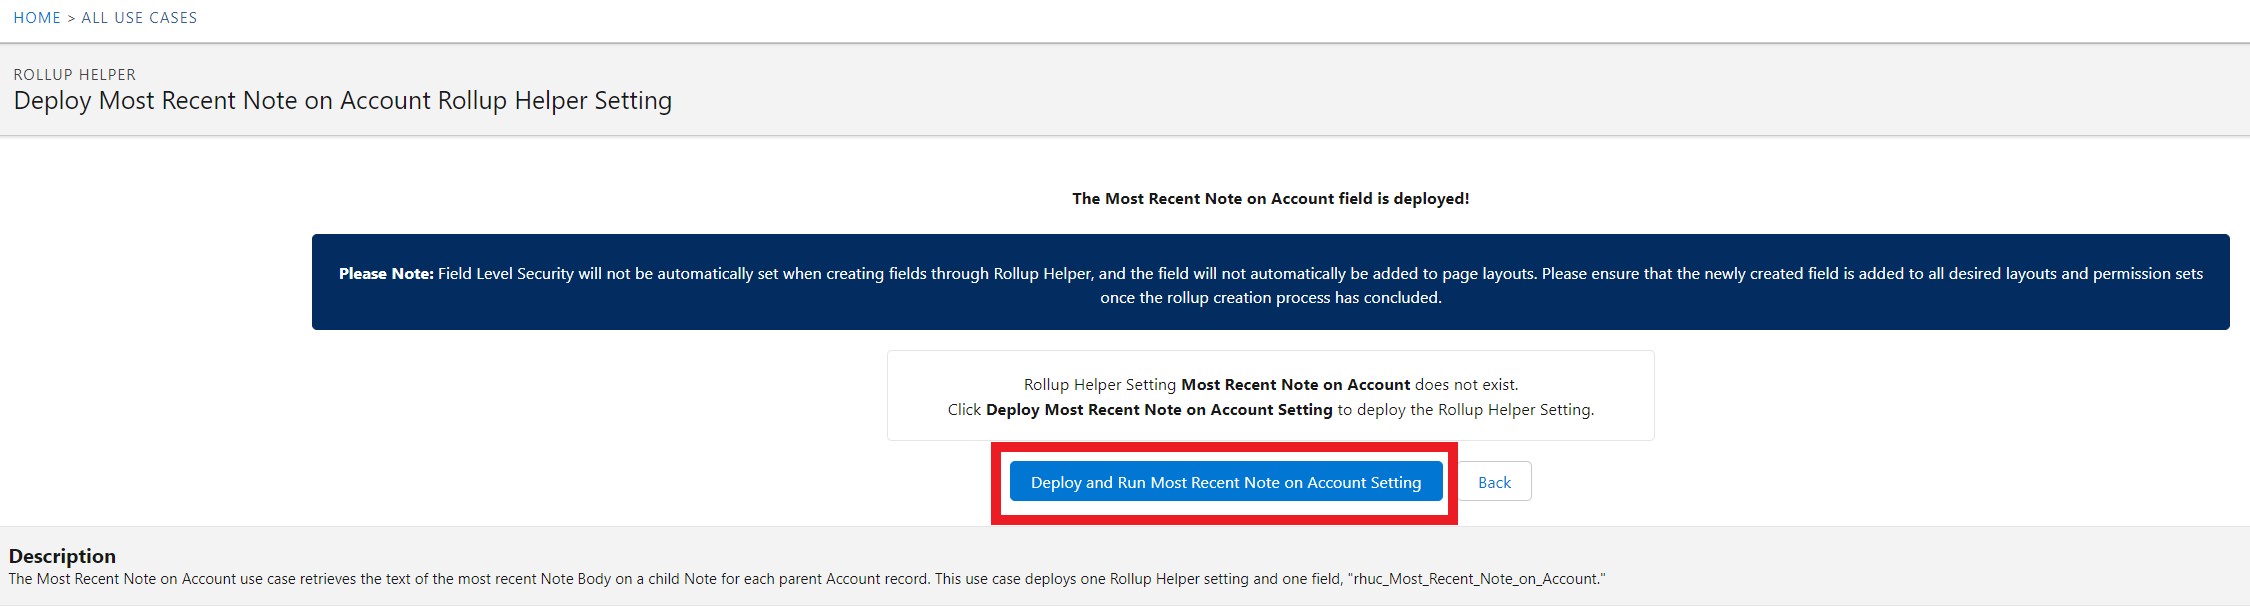 Most Recent Note on Account deploy setting